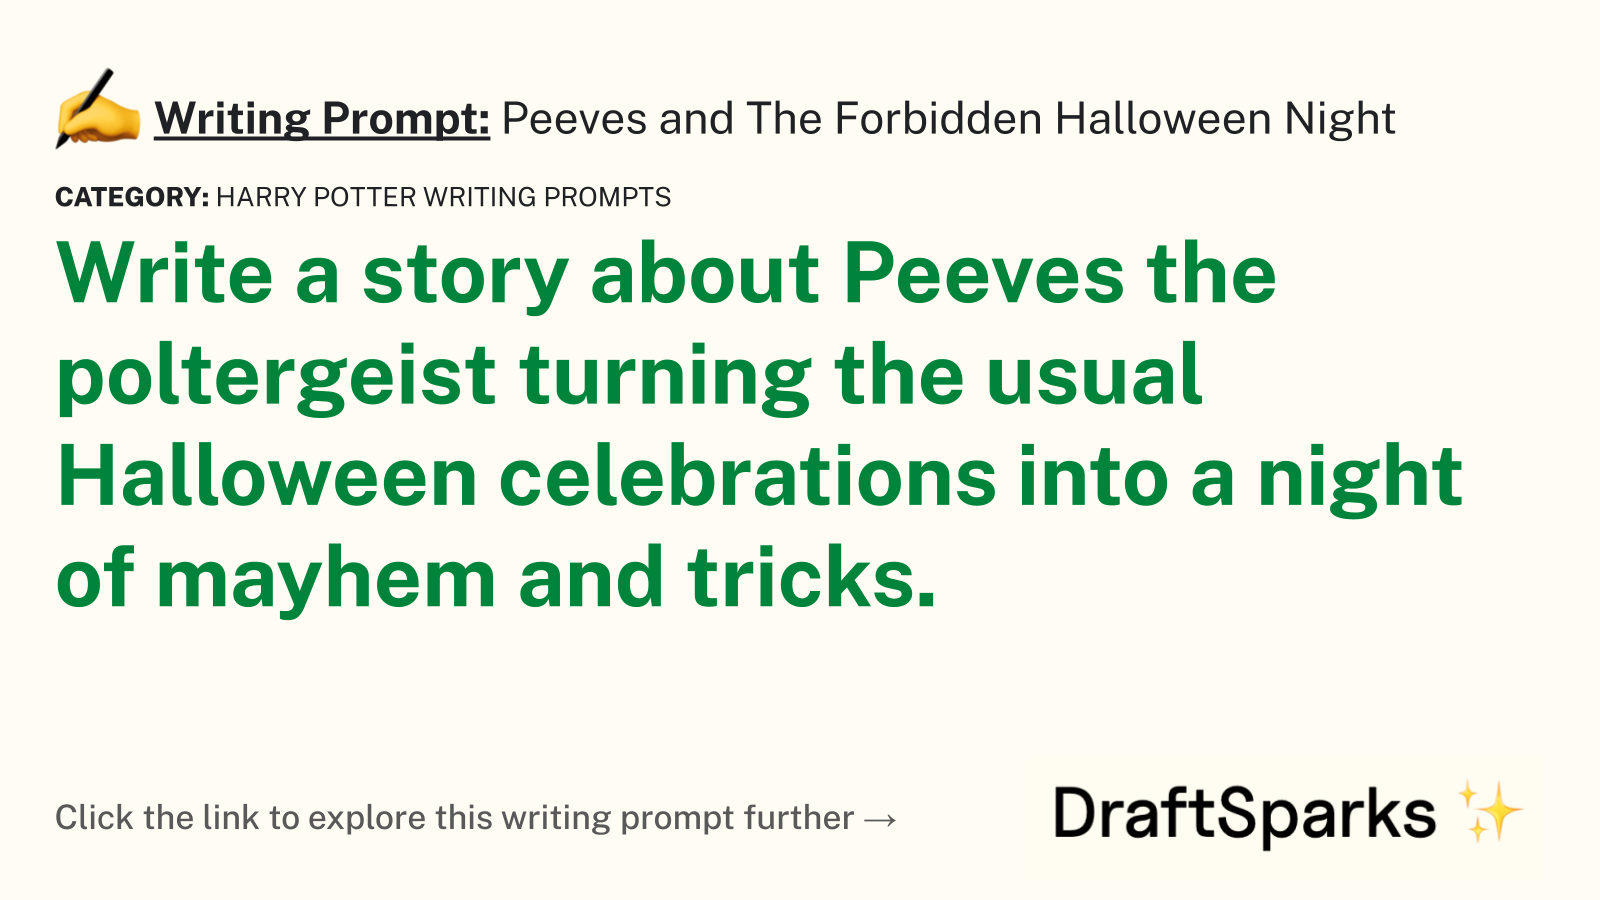 Peeves and The Forbidden Halloween Night